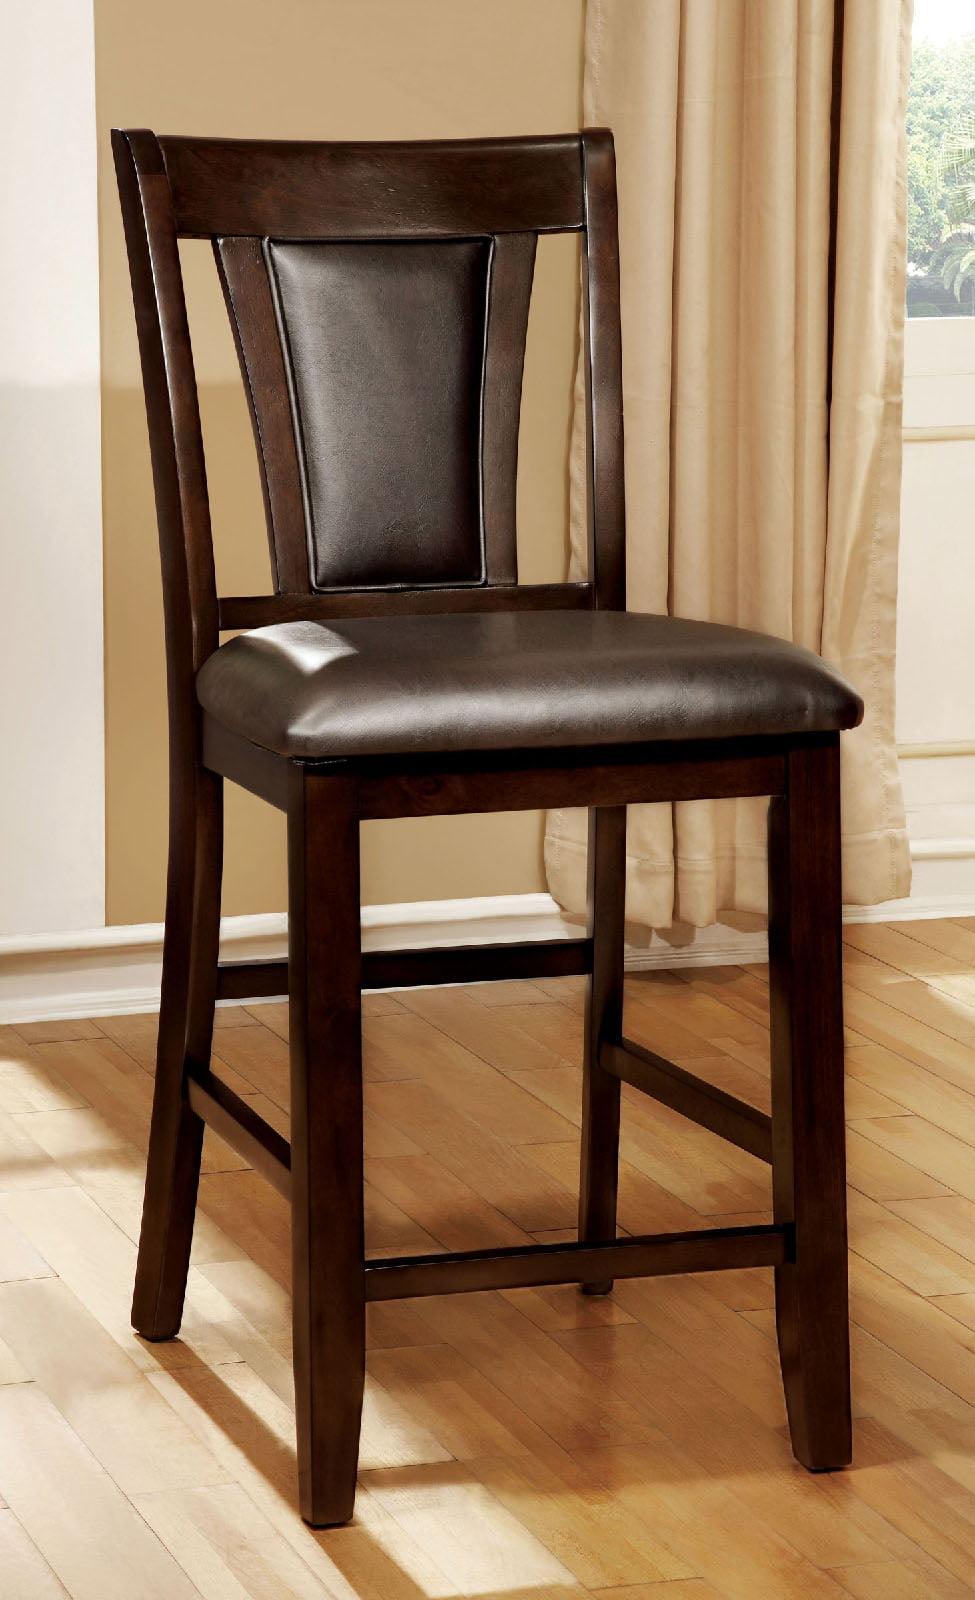 Transitional Espresso and Dark Cherry Counter Stools with Padded Leatherette Seat, Set of 2